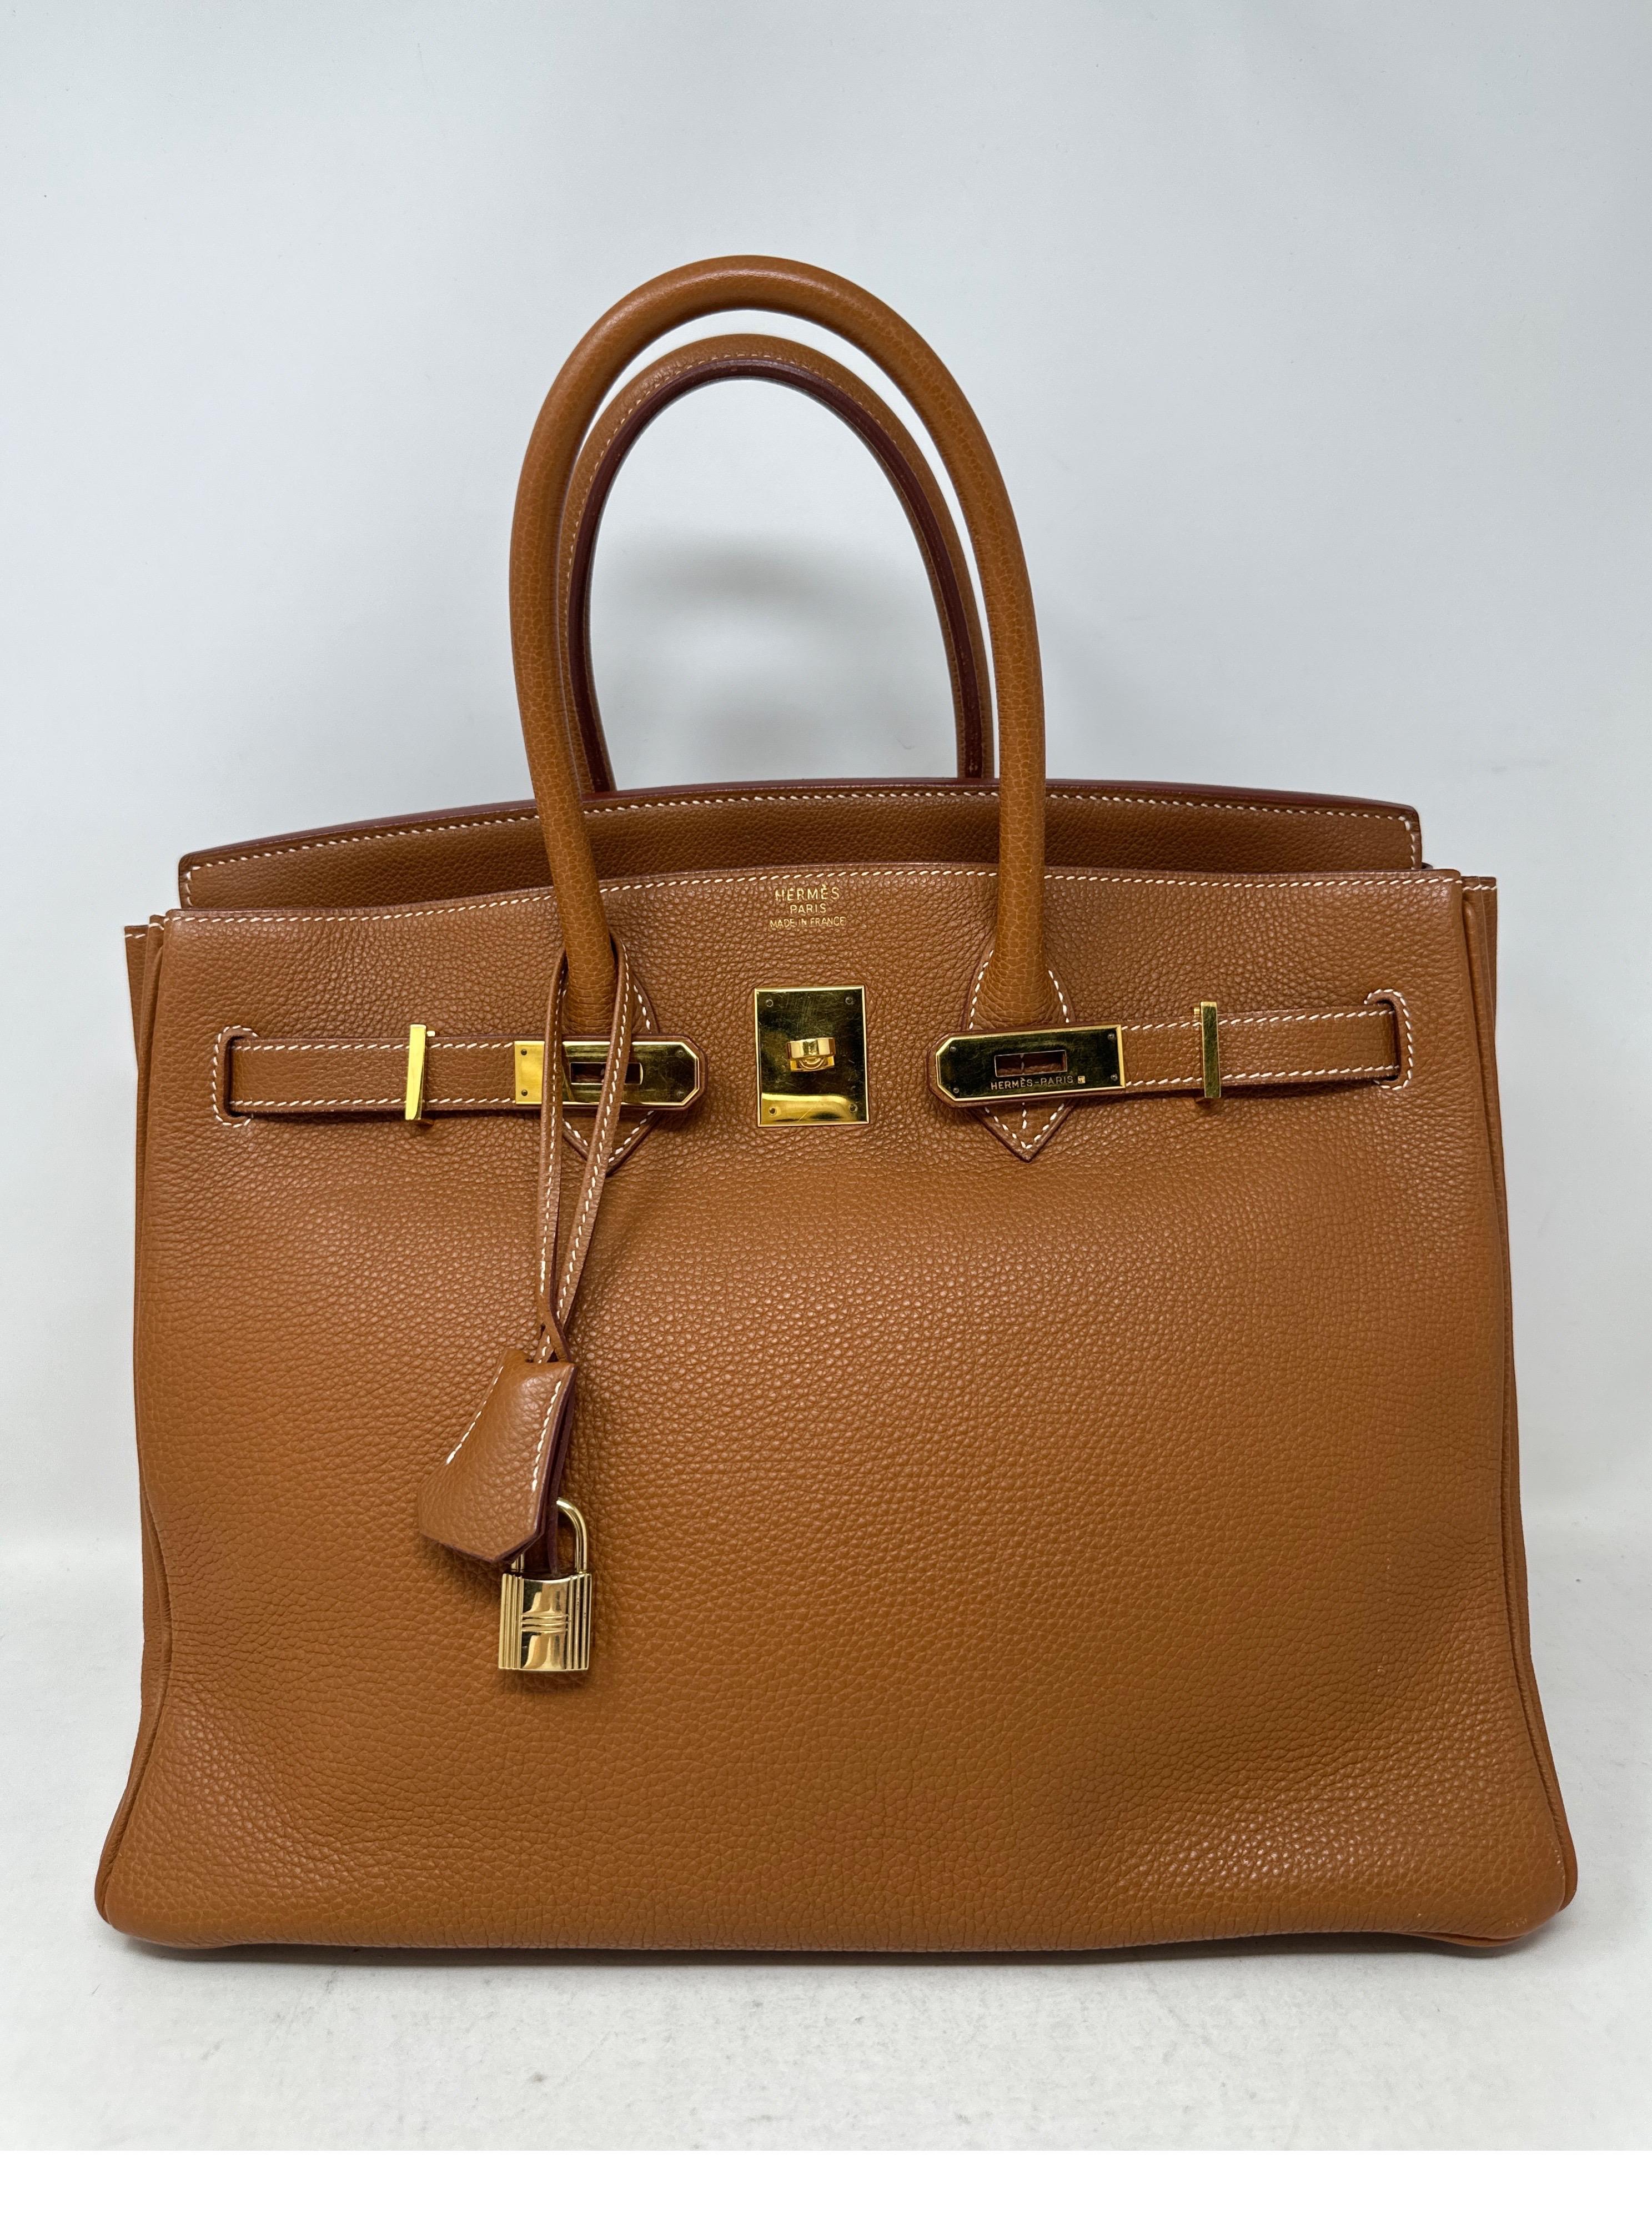 Hermes Gold Birkin 35 Bag. Clemence leather. Gold hardware. Most wanted combination. Classic bag. Interior clean. Good condition. Includes clochette, lock, keys, and dust bag. Guaranteed authentic. 